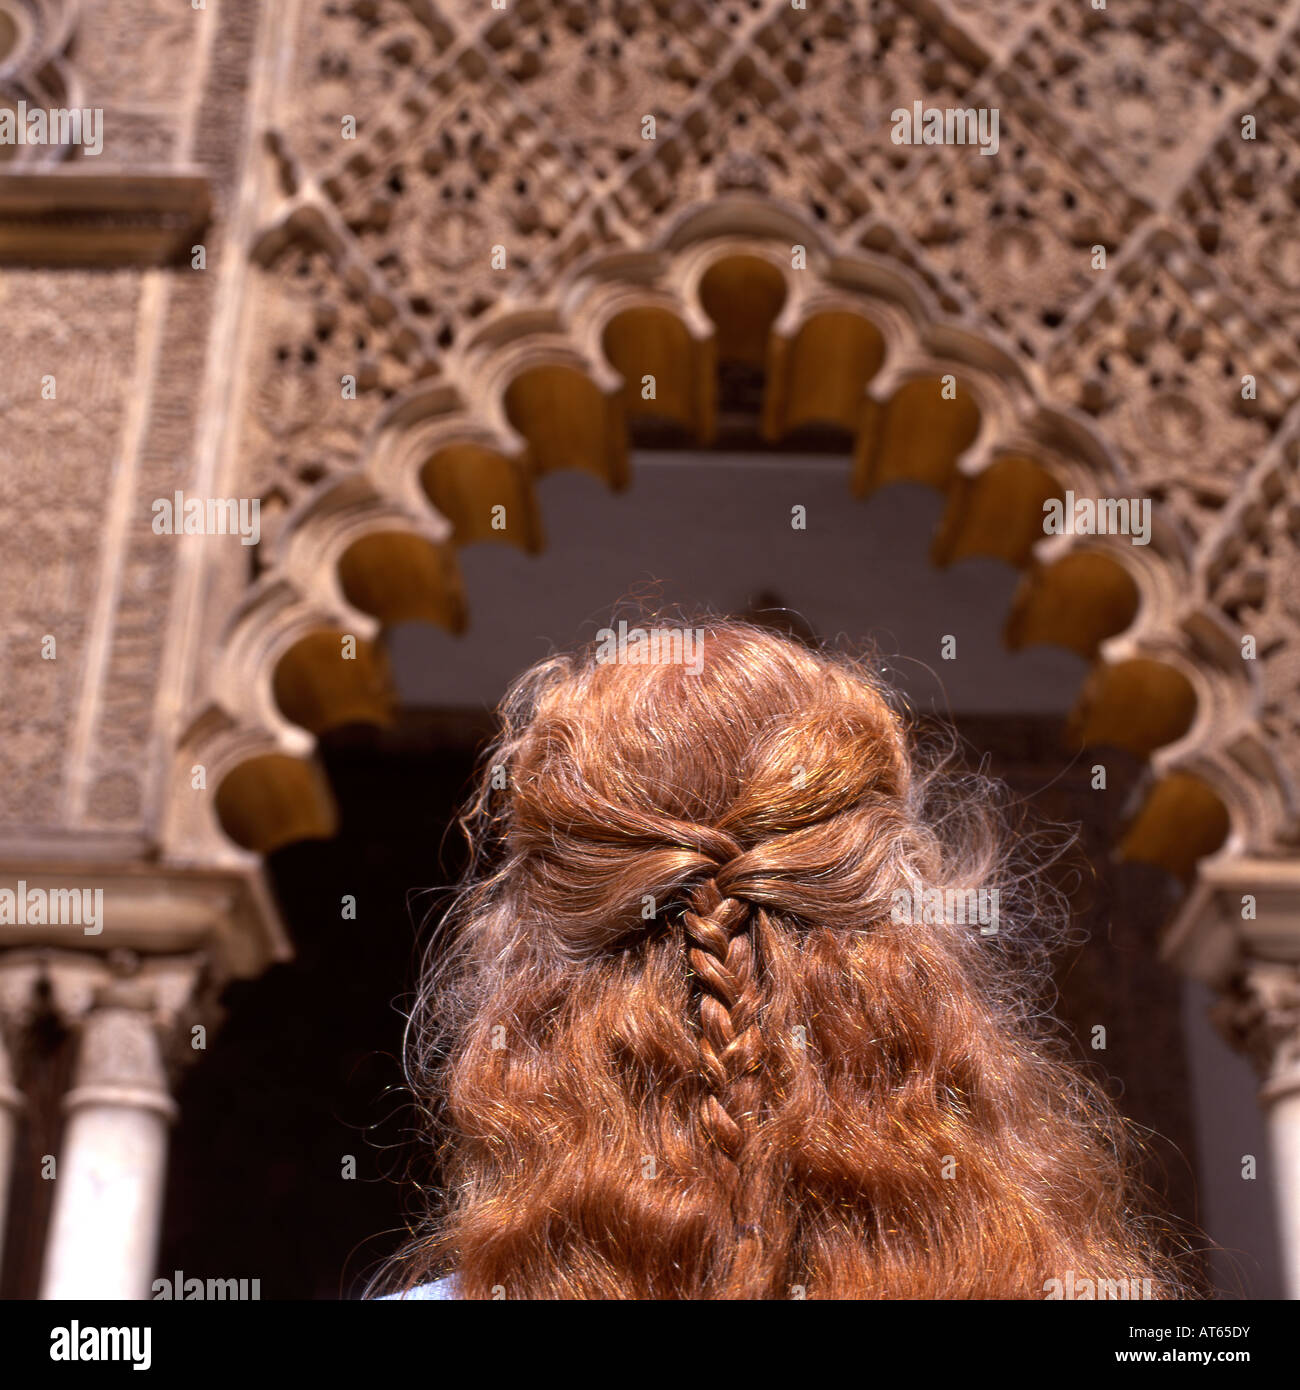 A woman with plaited red hair looking at architectural detail at the Real Alcazar in Seville Spain  KATHY DEWITT Stock Photo